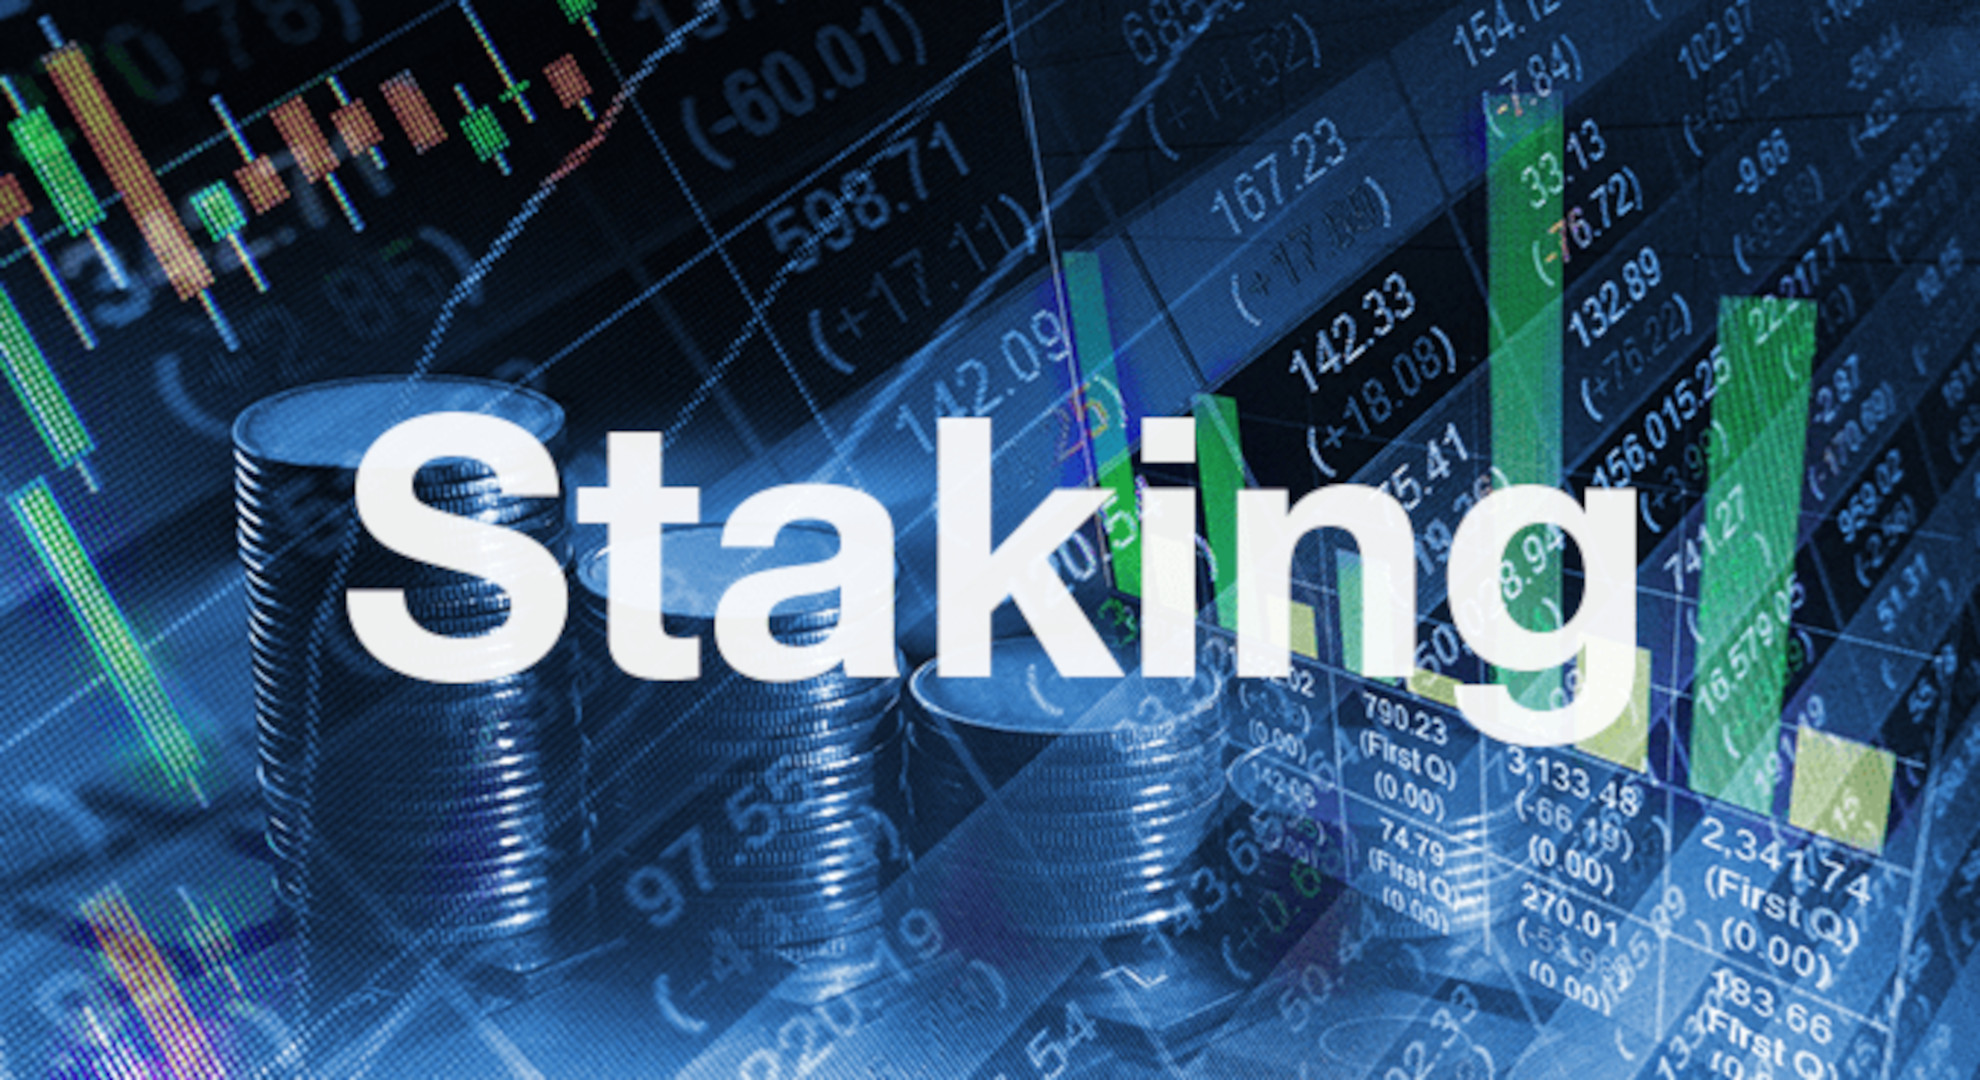 is crypto earn the same as staking